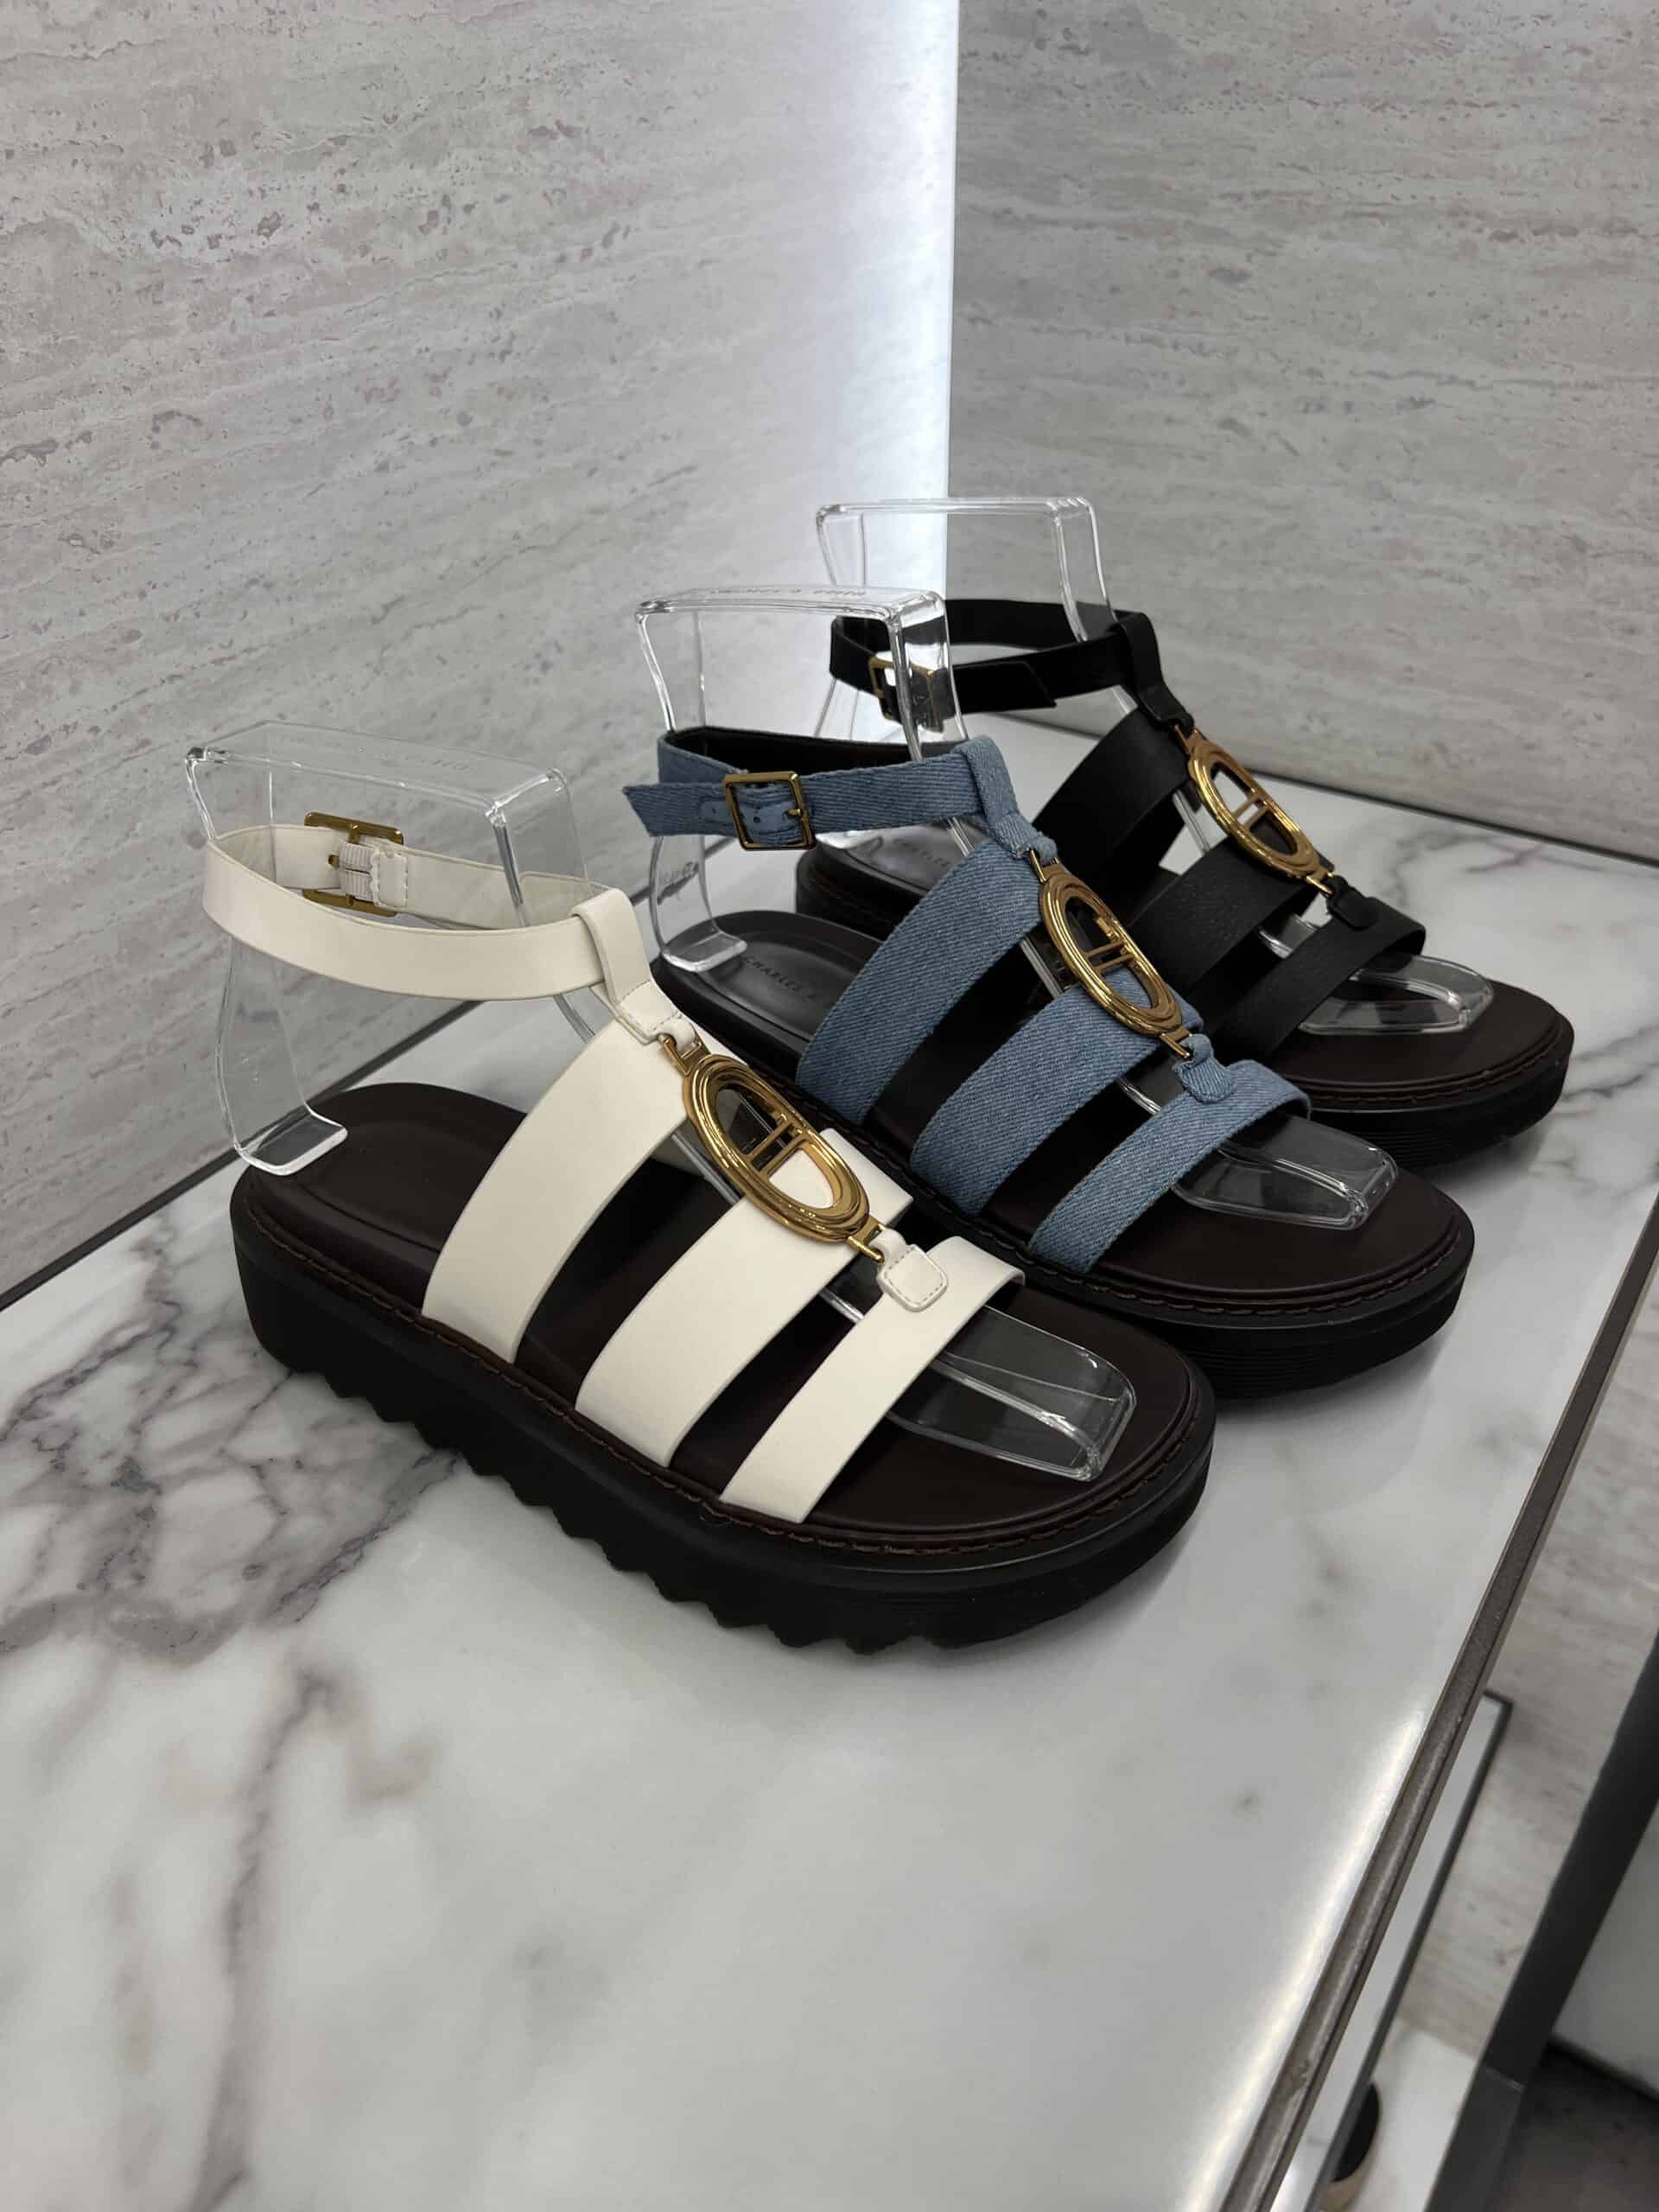 retail women ss23 flat sandals caged sporty flatform cleated leather denim metals black blue white charleskeith 1